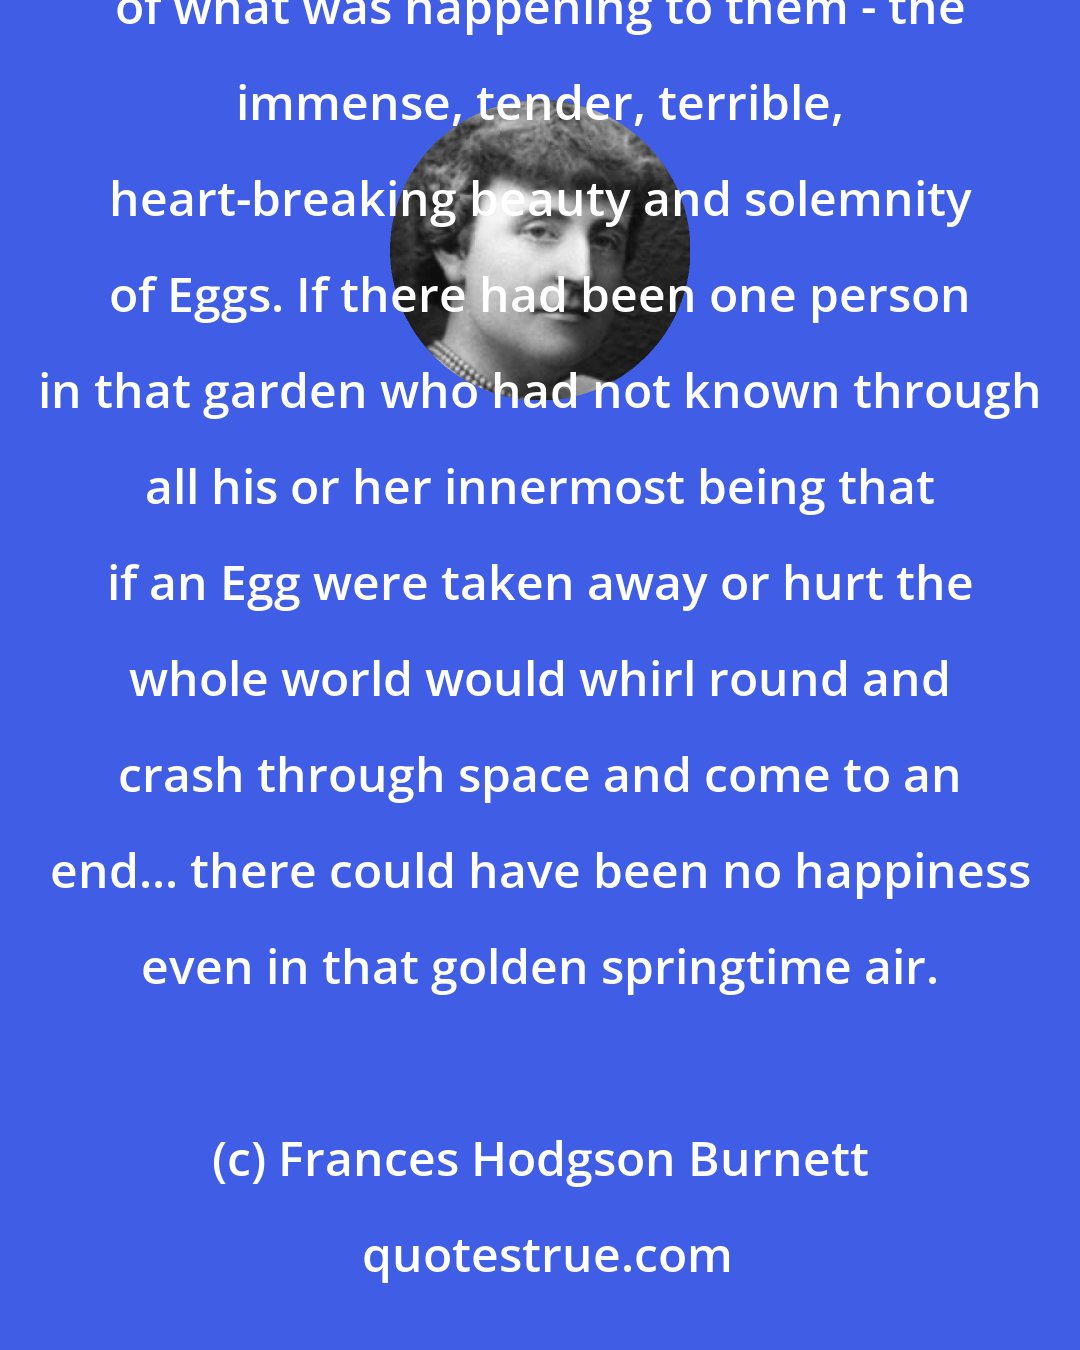 Frances Hodgson Burnett: In the garden there was nothing which was not quite like themselves - nothing which did not understand the wonderfulness of what was happening to them - the immense, tender, terrible, heart-breaking beauty and solemnity of Eggs. If there had been one person in that garden who had not known through all his or her innermost being that if an Egg were taken away or hurt the whole world would whirl round and crash through space and come to an end... there could have been no happiness even in that golden springtime air.